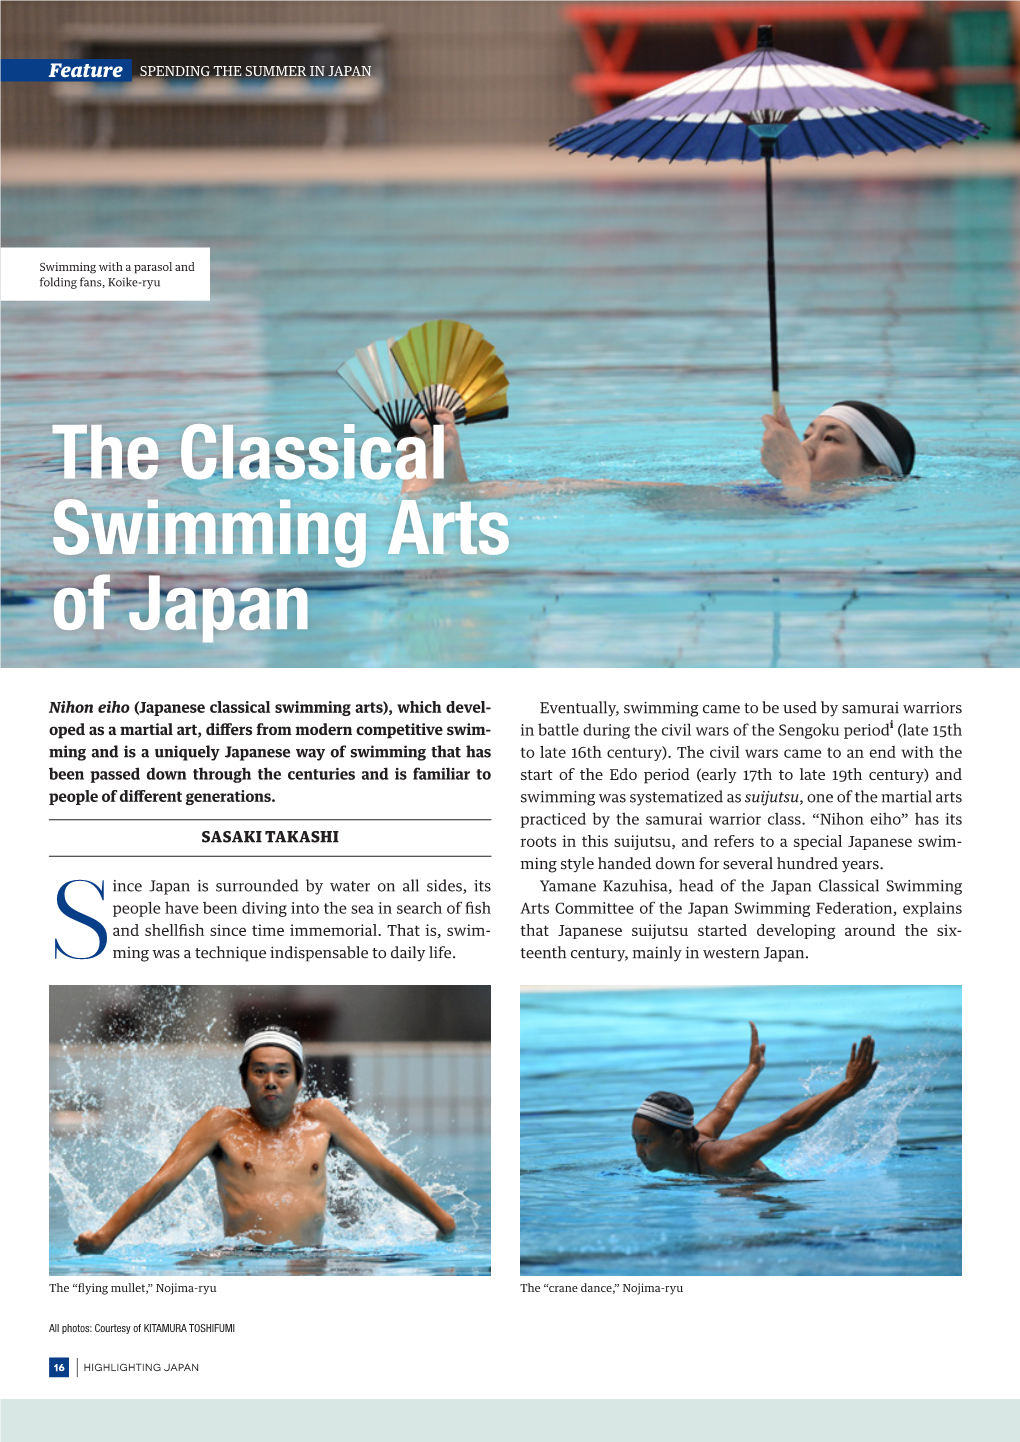 The Classical Swimming Arts of Japan